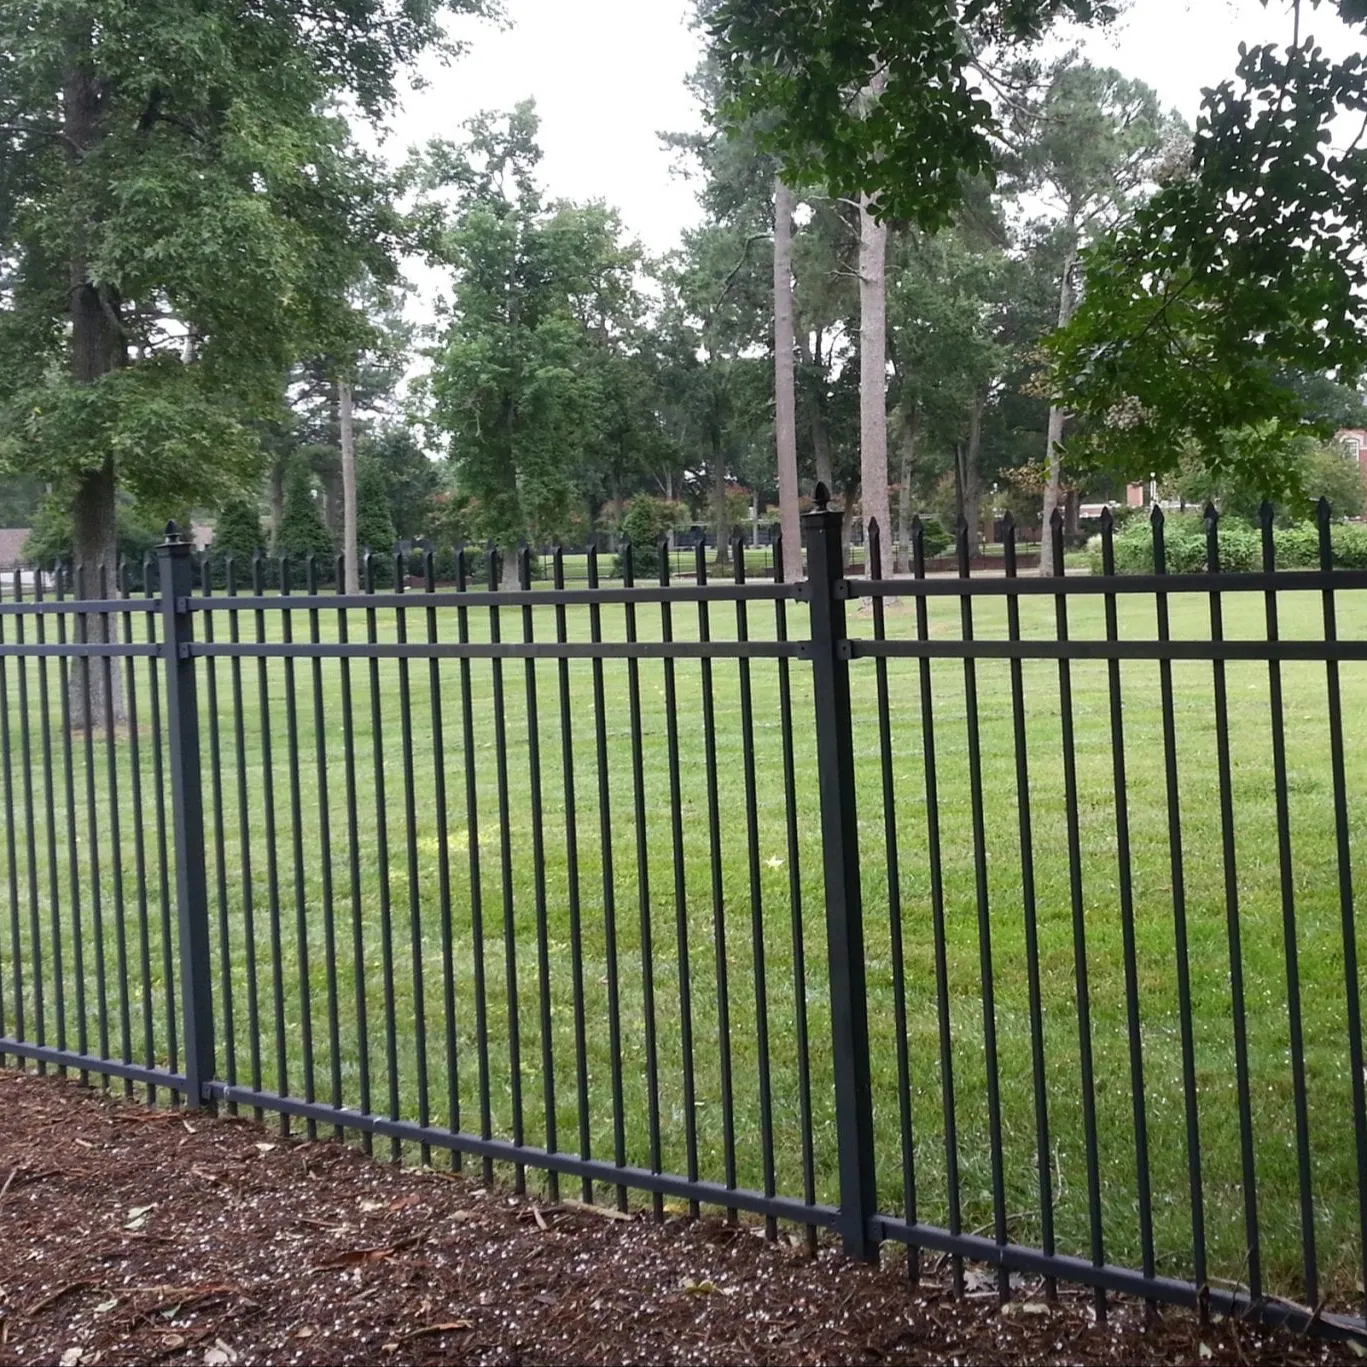 Cheap hot sale High-security applications galvanized Steel Fence garden Fencing and design gates